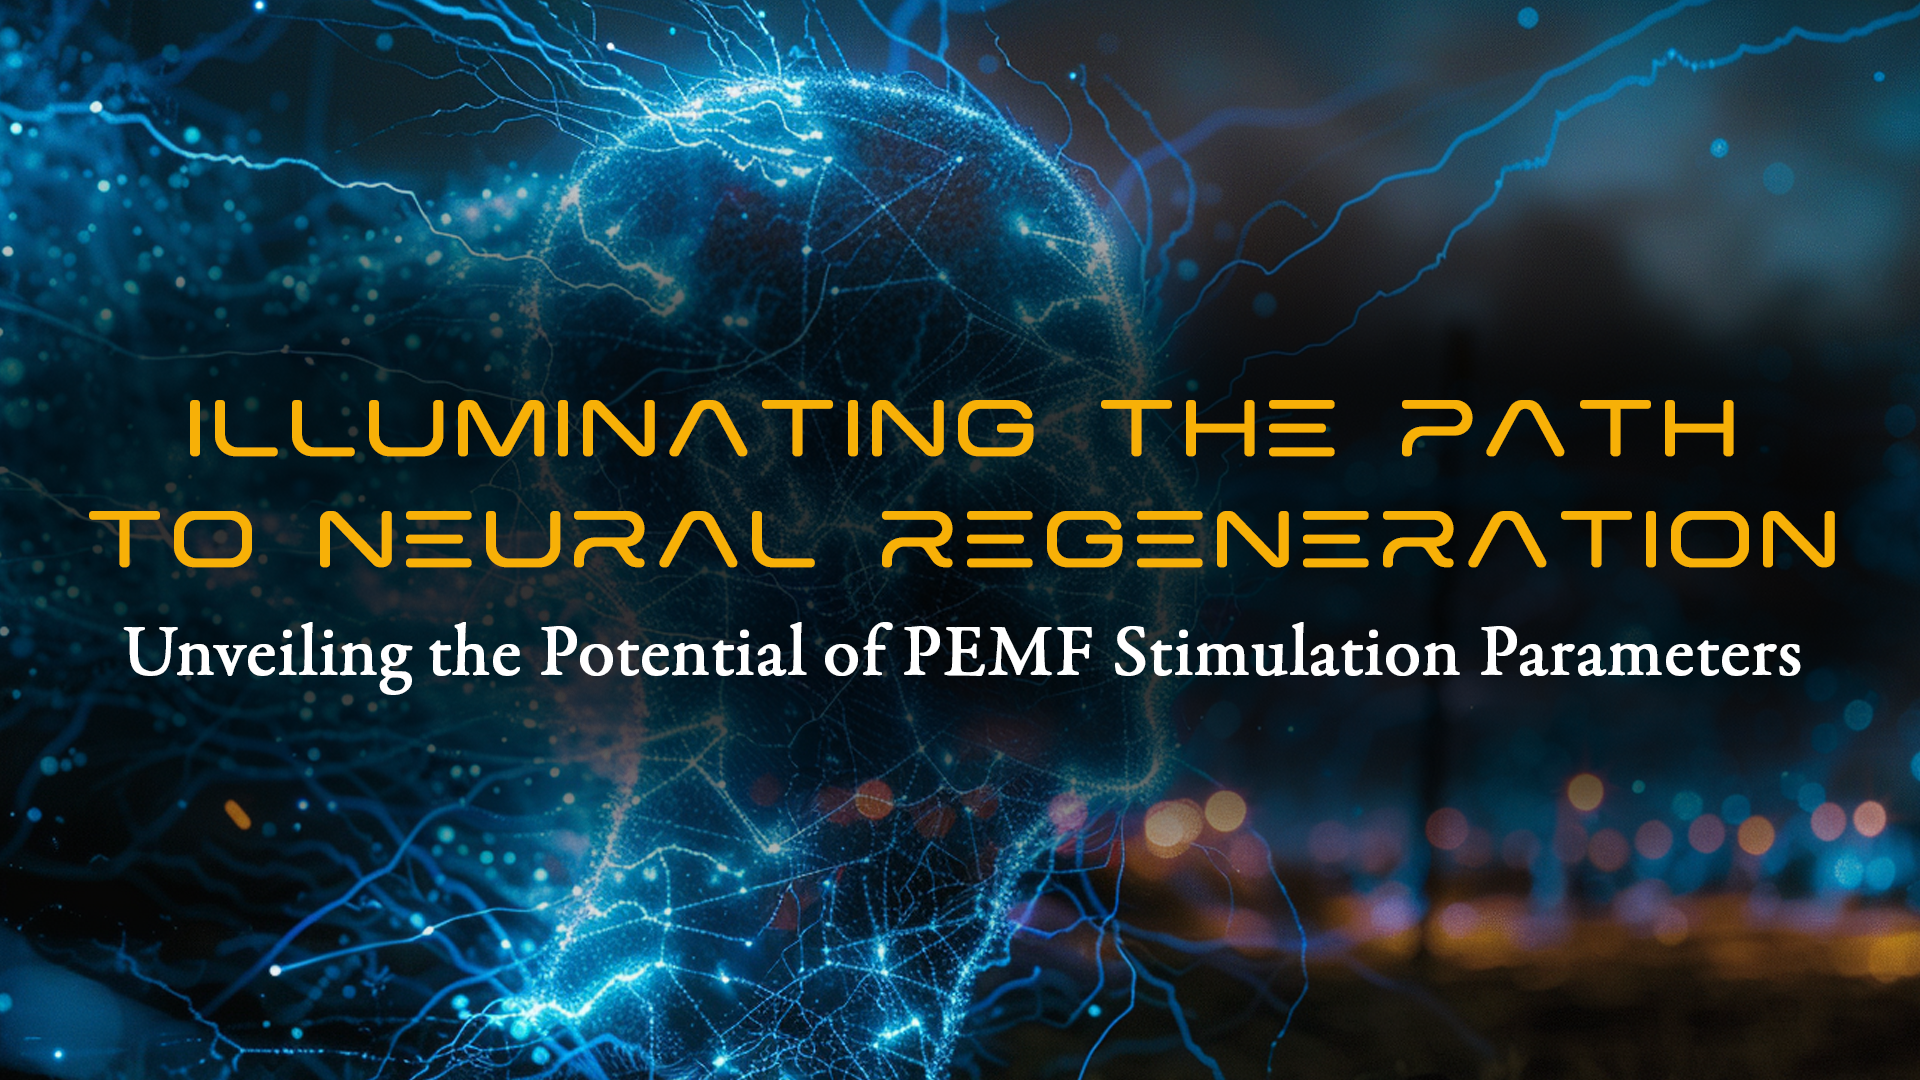 Illuminating the Path to Neural Regeneration: Unveiling the Potential of PEMF Stimulation Parameters